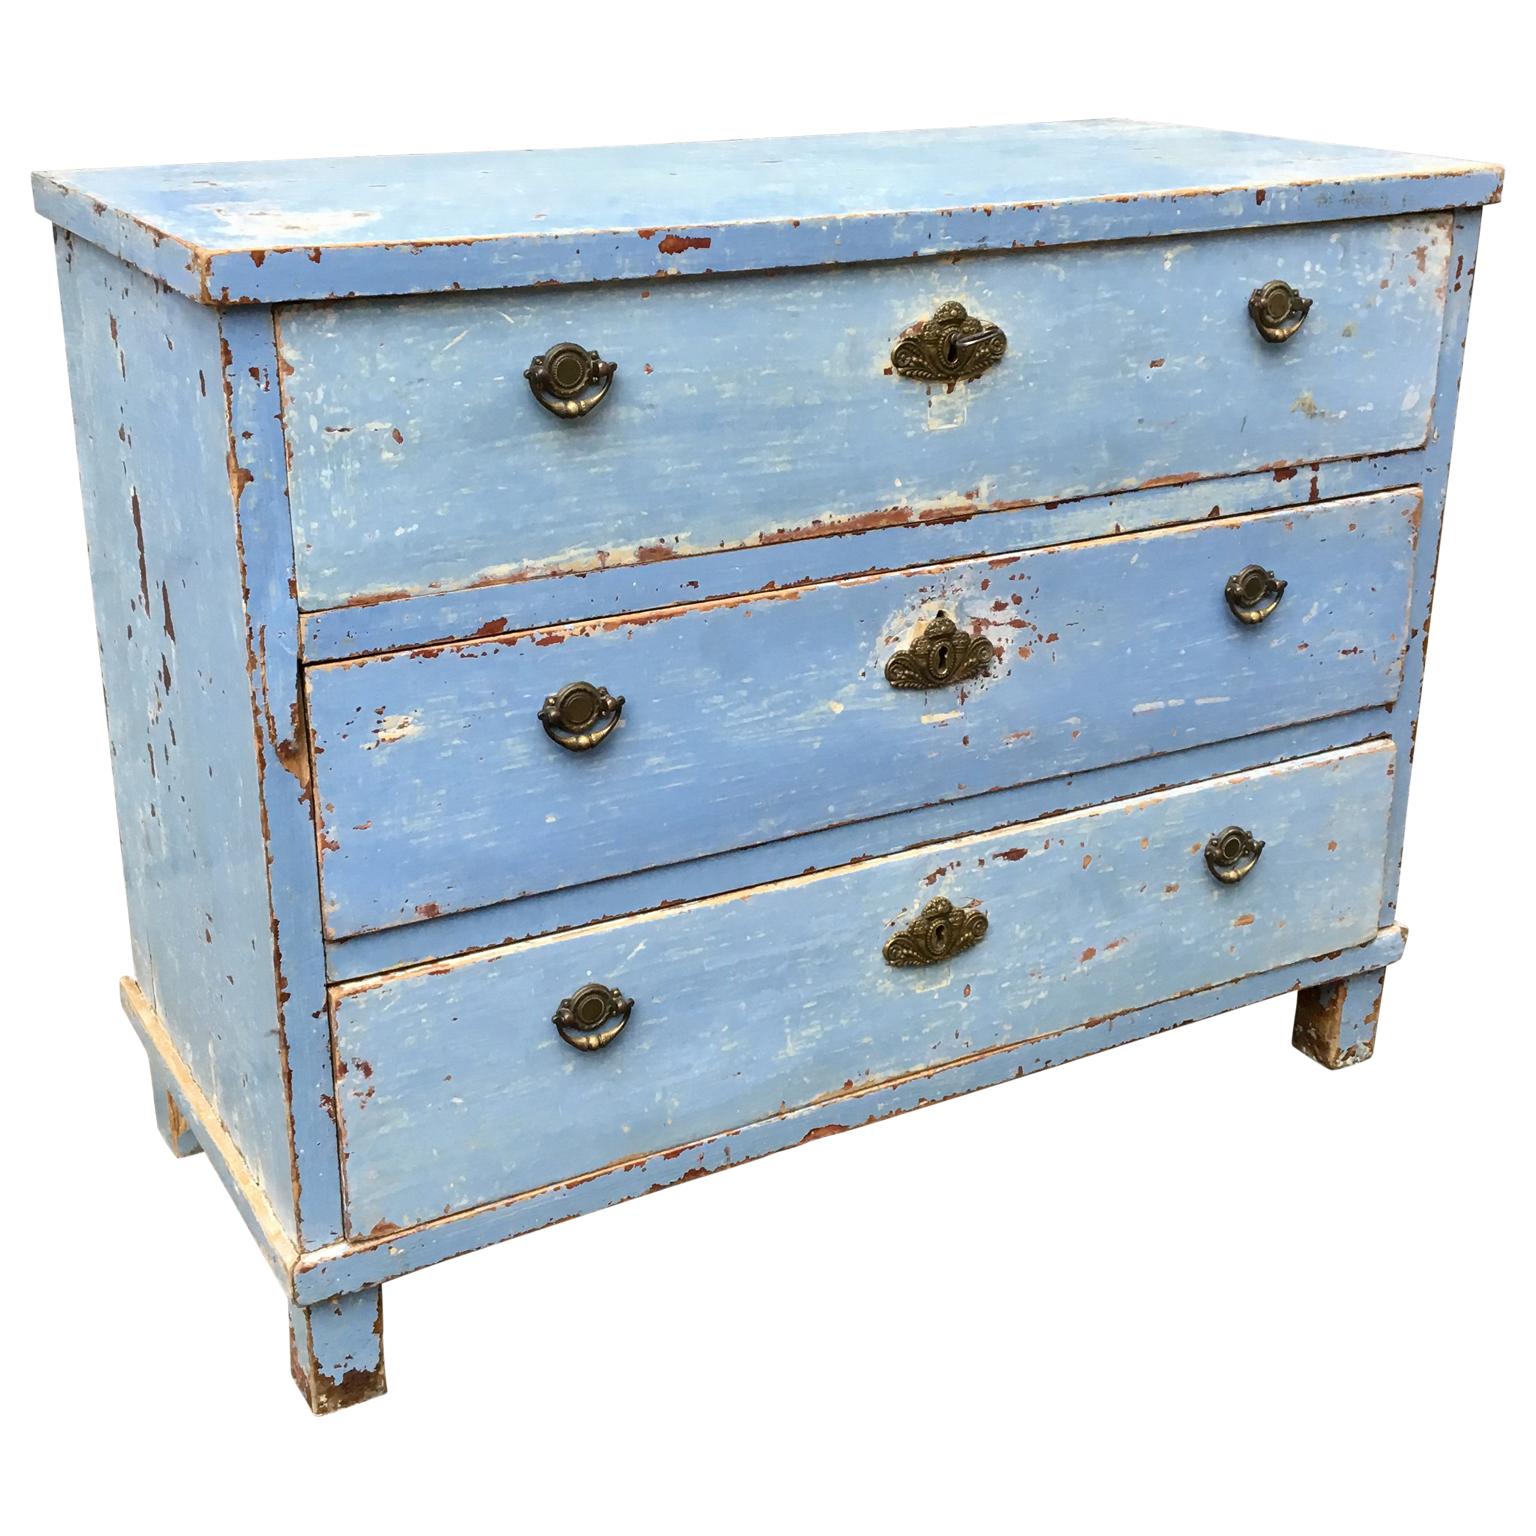 An early 19th century Swedish chest of drawers with its scraped old blue color. The simplicity of the Scandinavian Folk Art style 